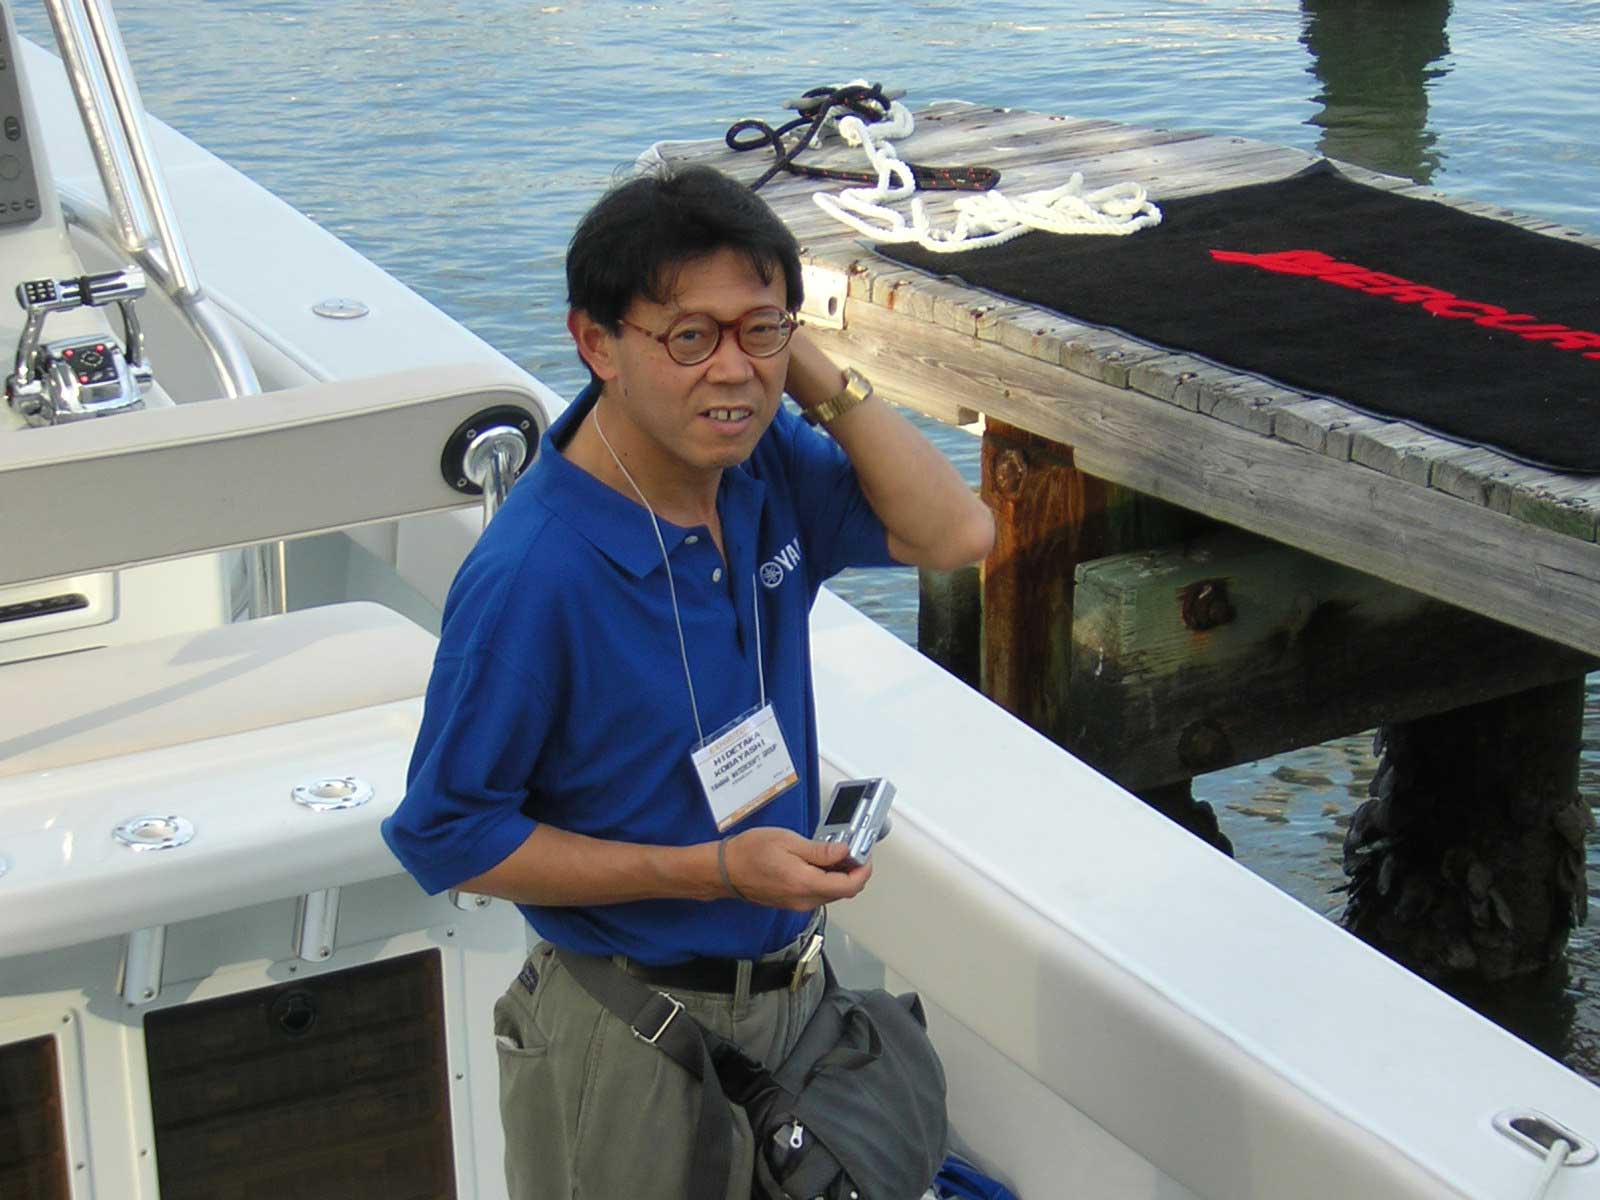 Photo: Mercury Verado Engine at On-Water Test Drive Dock--Yamaha Engineer taking pictures